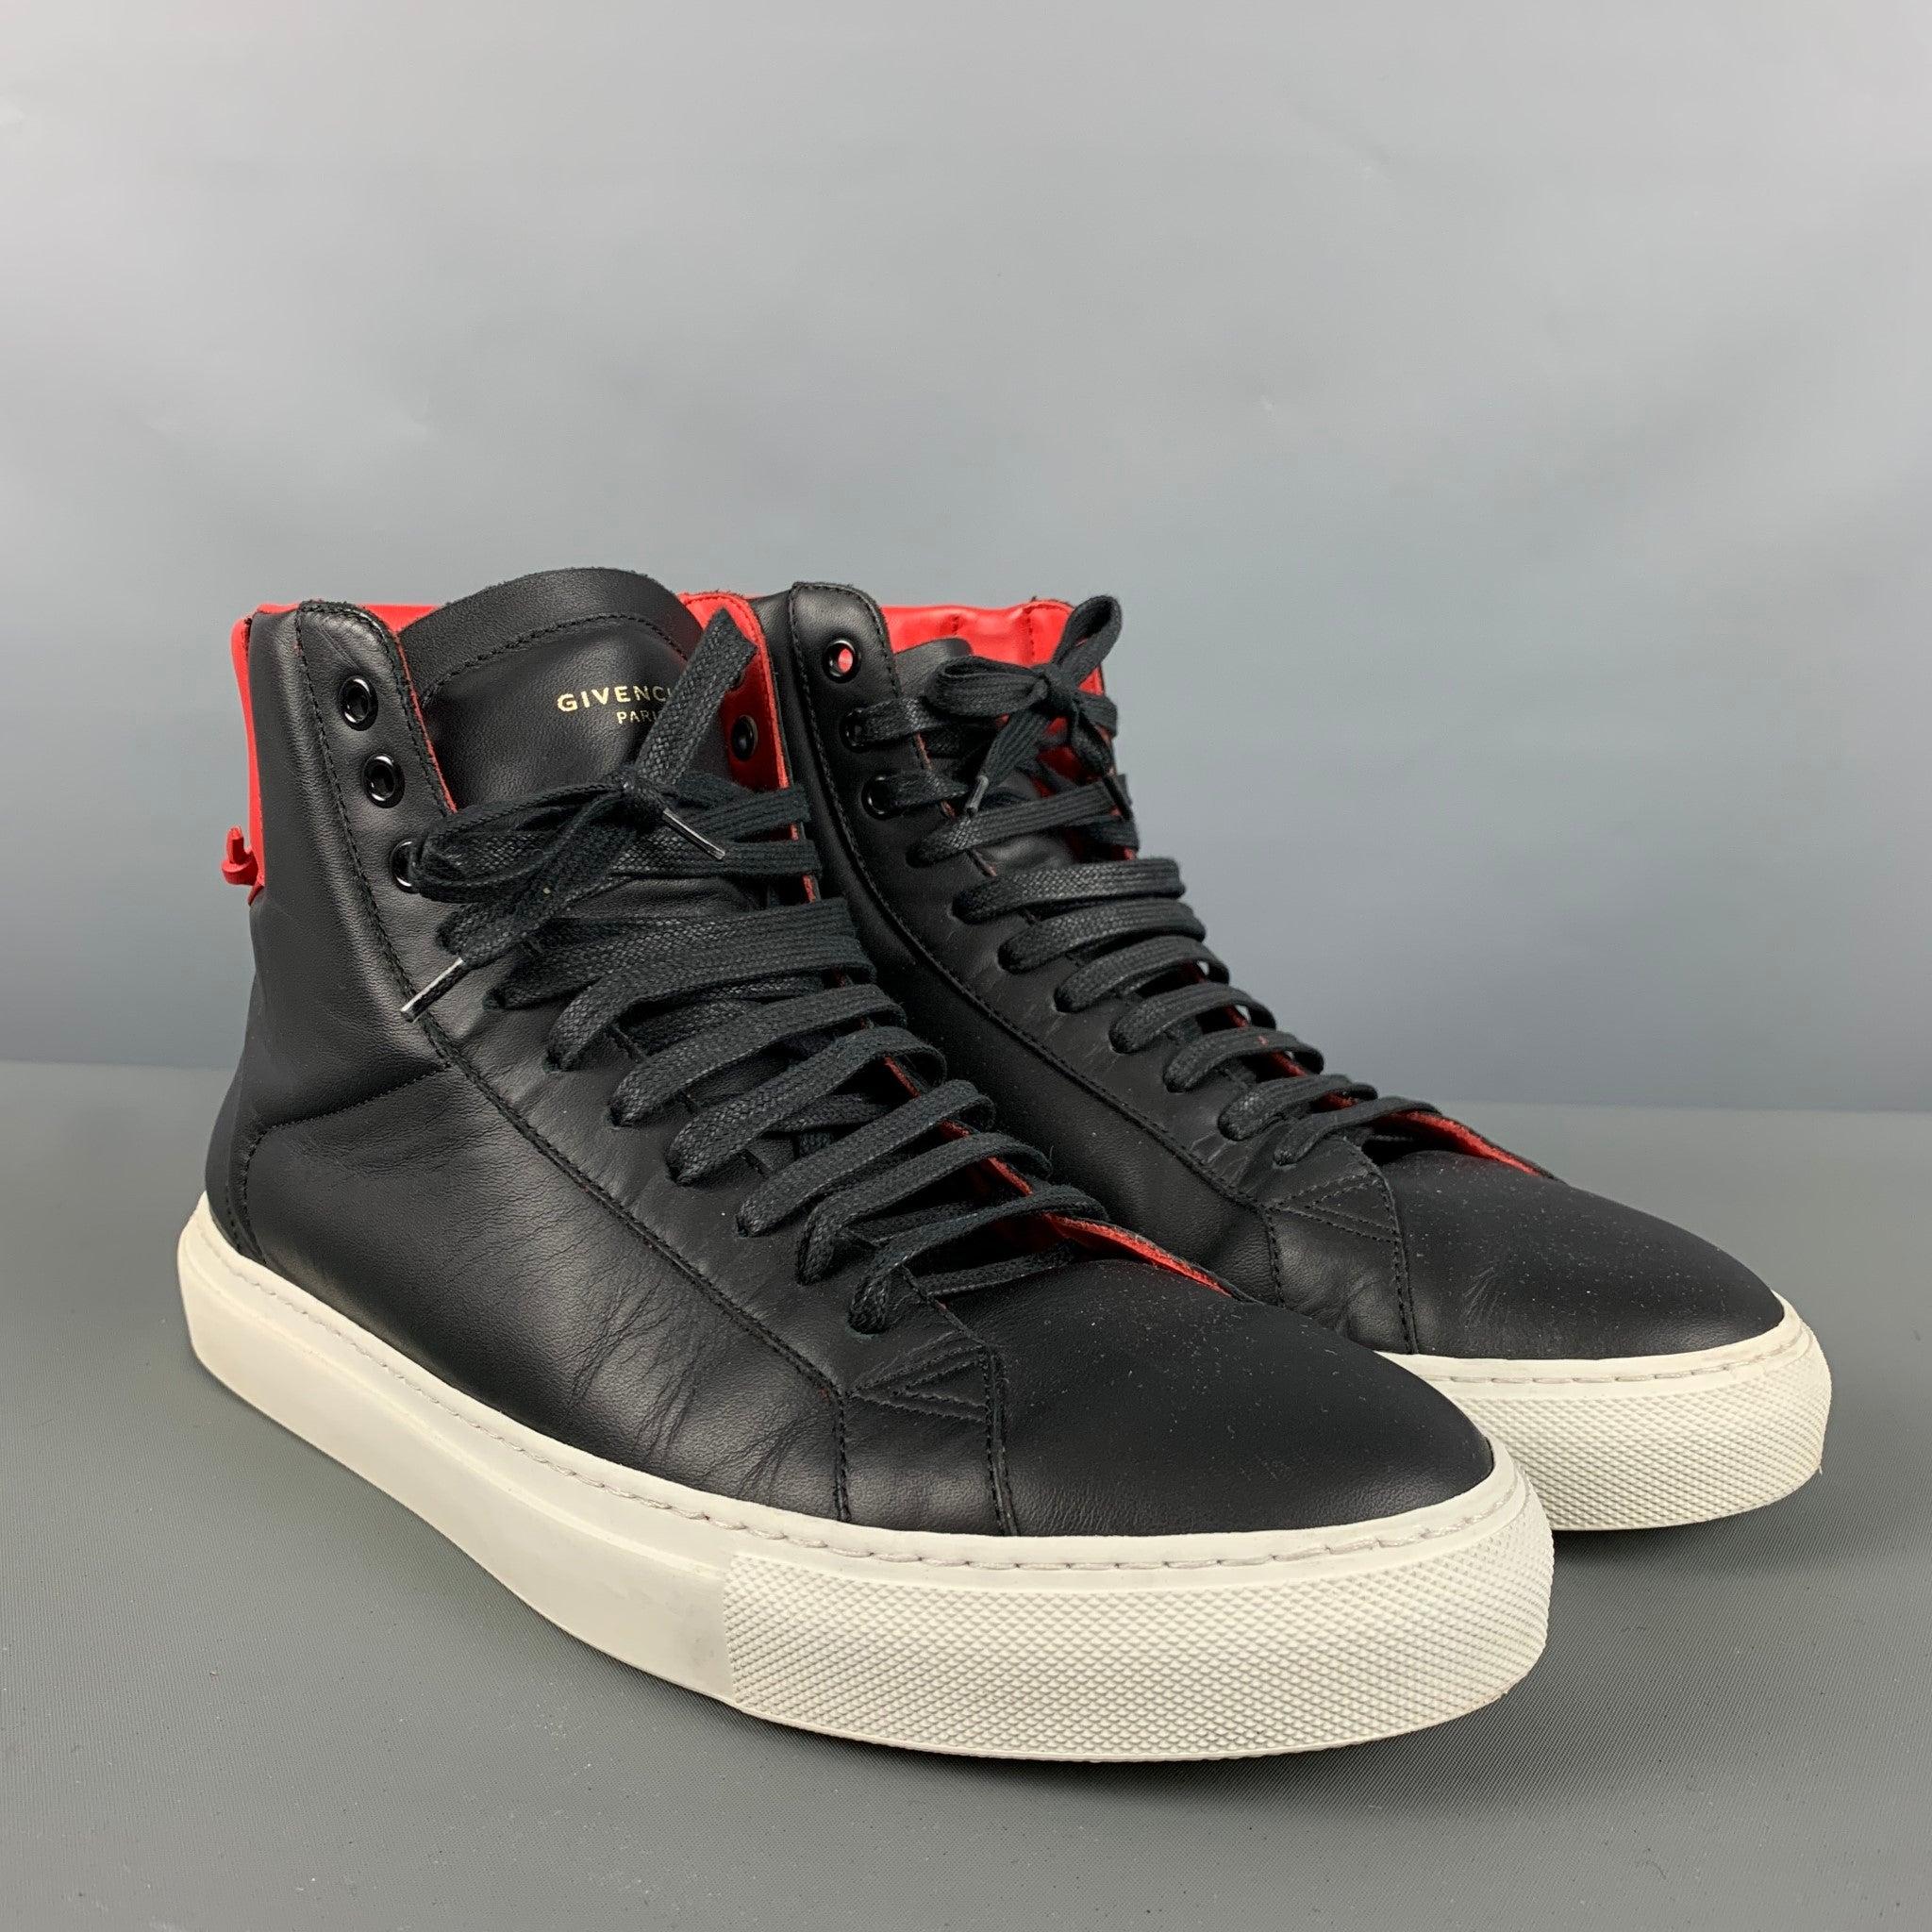 GIVENCHY high top sneakers comes in a black, red and white
 leather featuring a color block style, rubber sole, and a lace up style. Made in Italy.Very Good Pre-Owned Condition. Light wear. As-is. 

Marked:   43 

Measurements: 
  Length: 12 inches